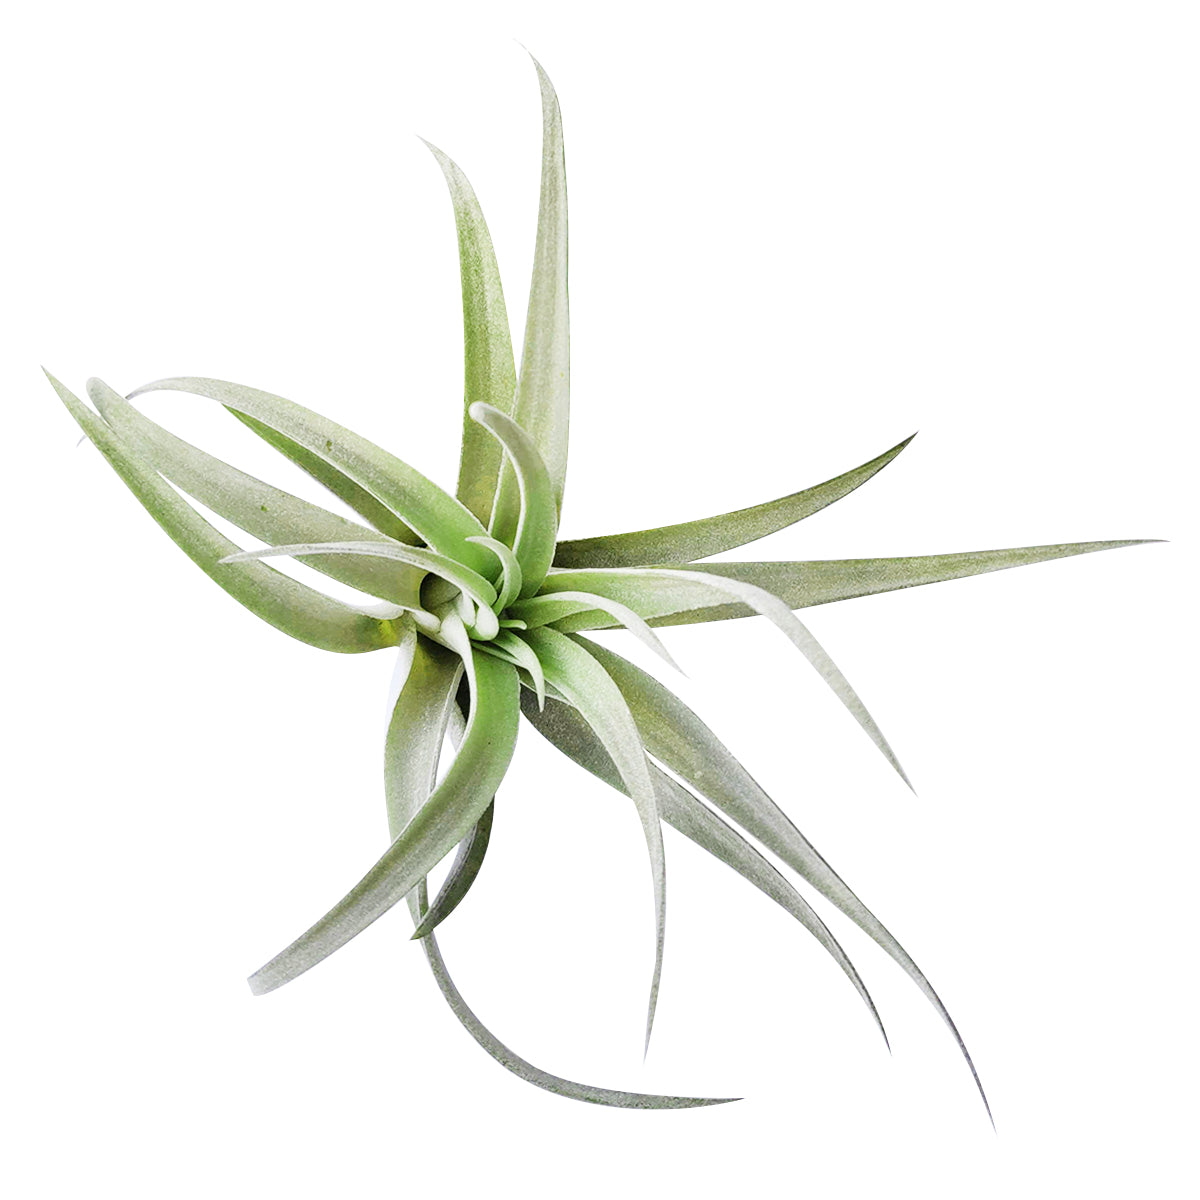 tillandsia harrisii care, tillandsia harrisii care, how to water tillandsia air plant, do tillandsia die after flowering, tillandsia harrisii black, tillandsia harrisii flower, how to care for tillandsia air plants